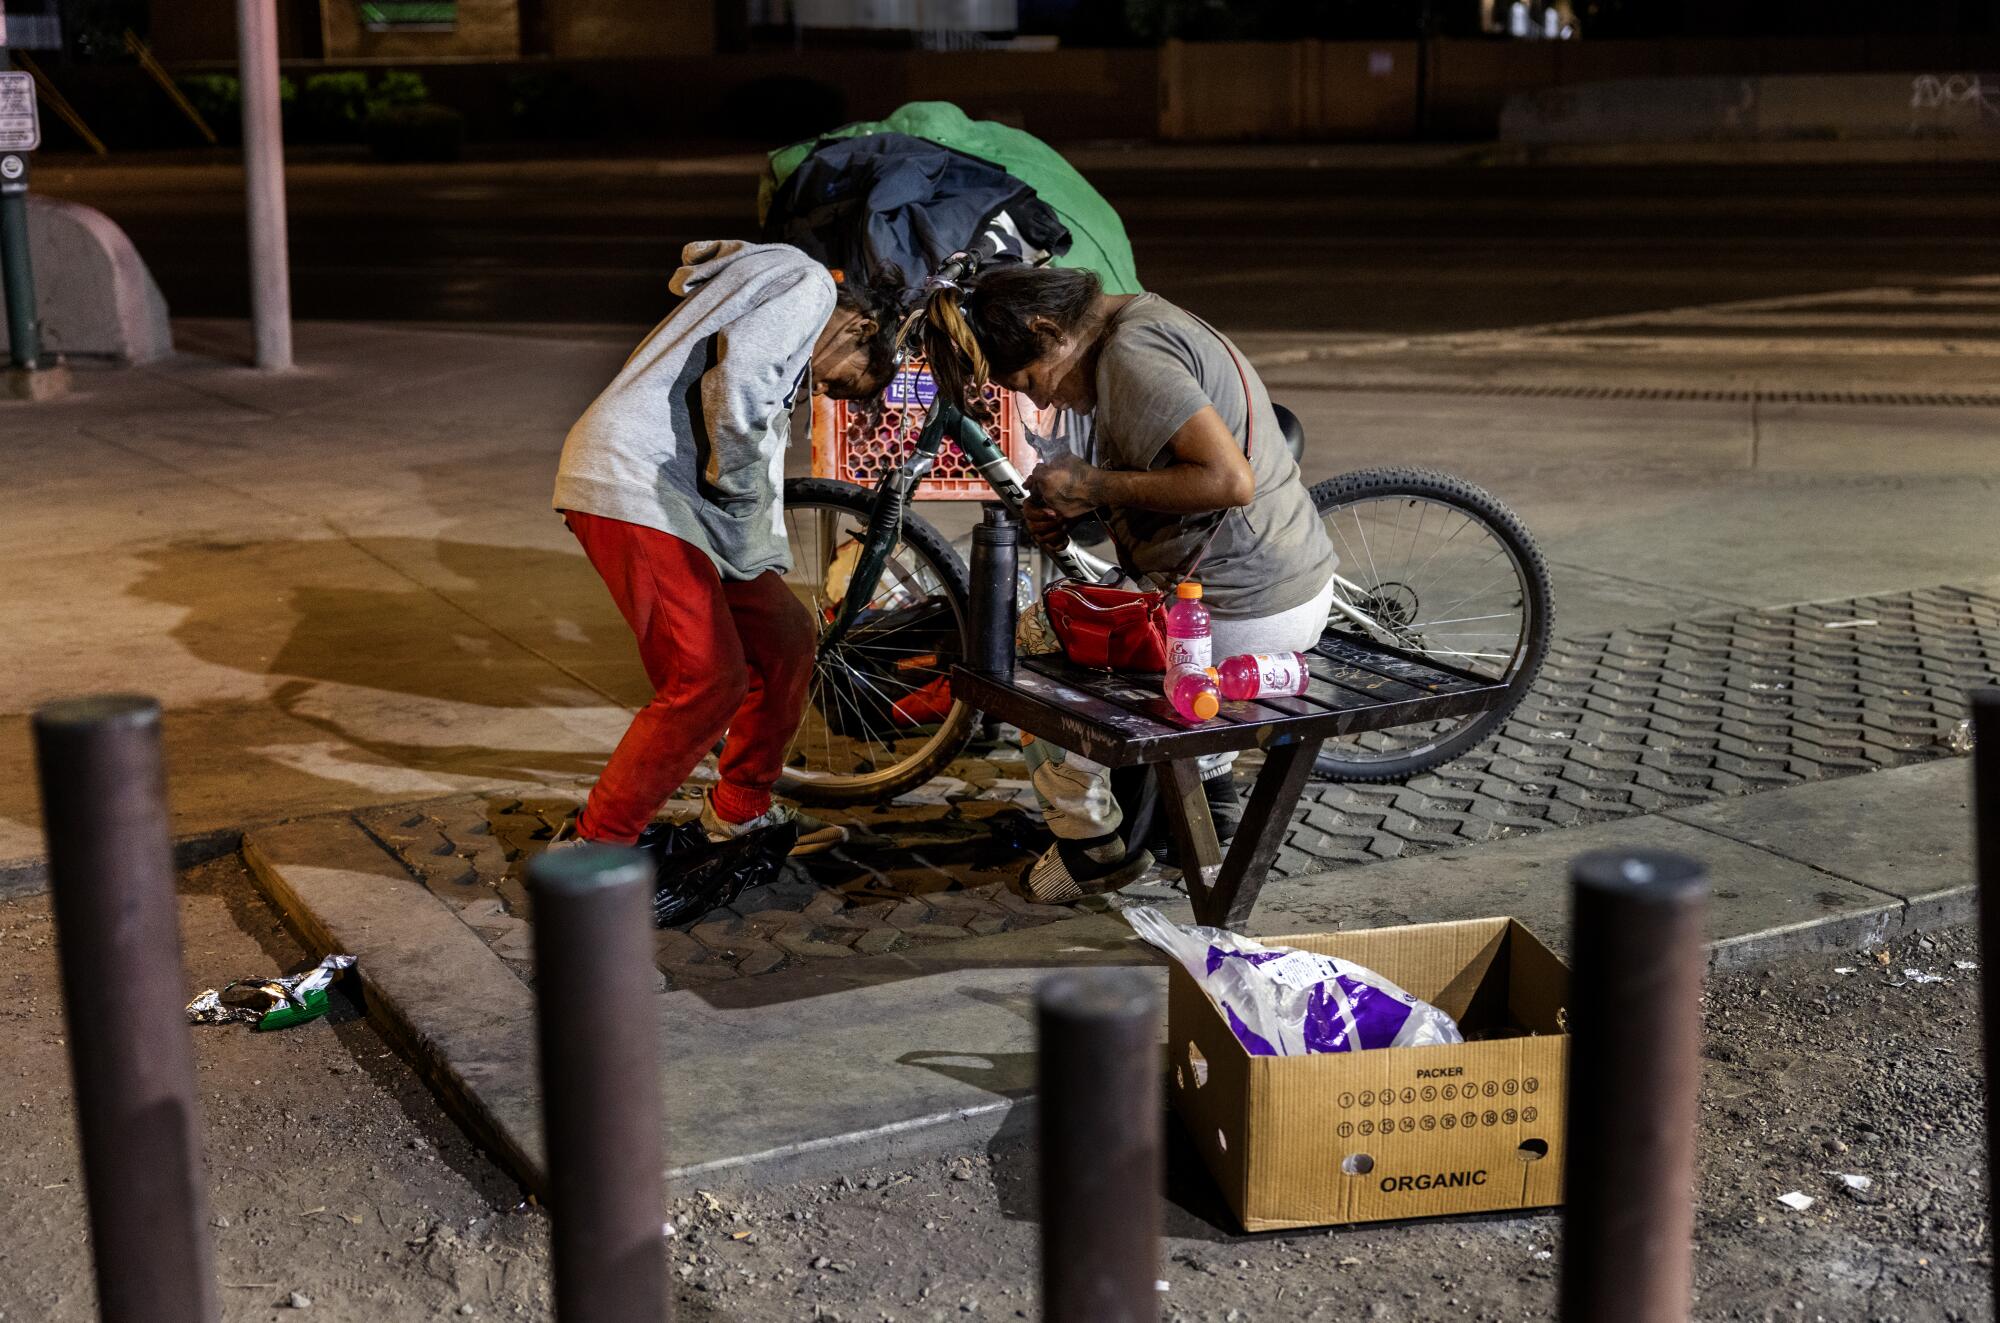 Two people next to a bike after dark, one standing hunched and one sitting, with bright-pink beverage bottles and belongings